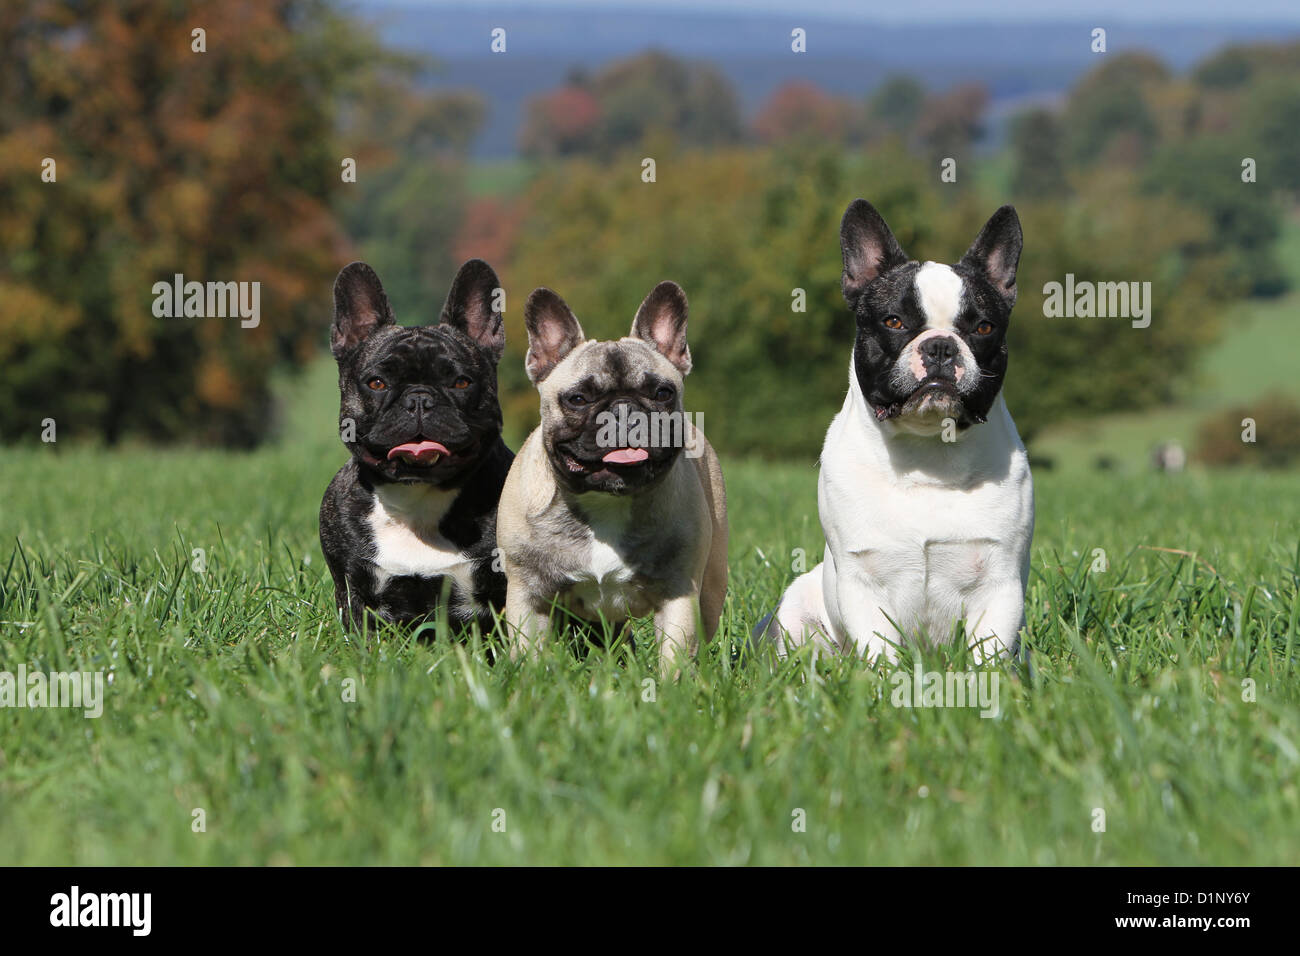 Dog French Bulldog / Bouledogue Français three adults different colors Stock Photo